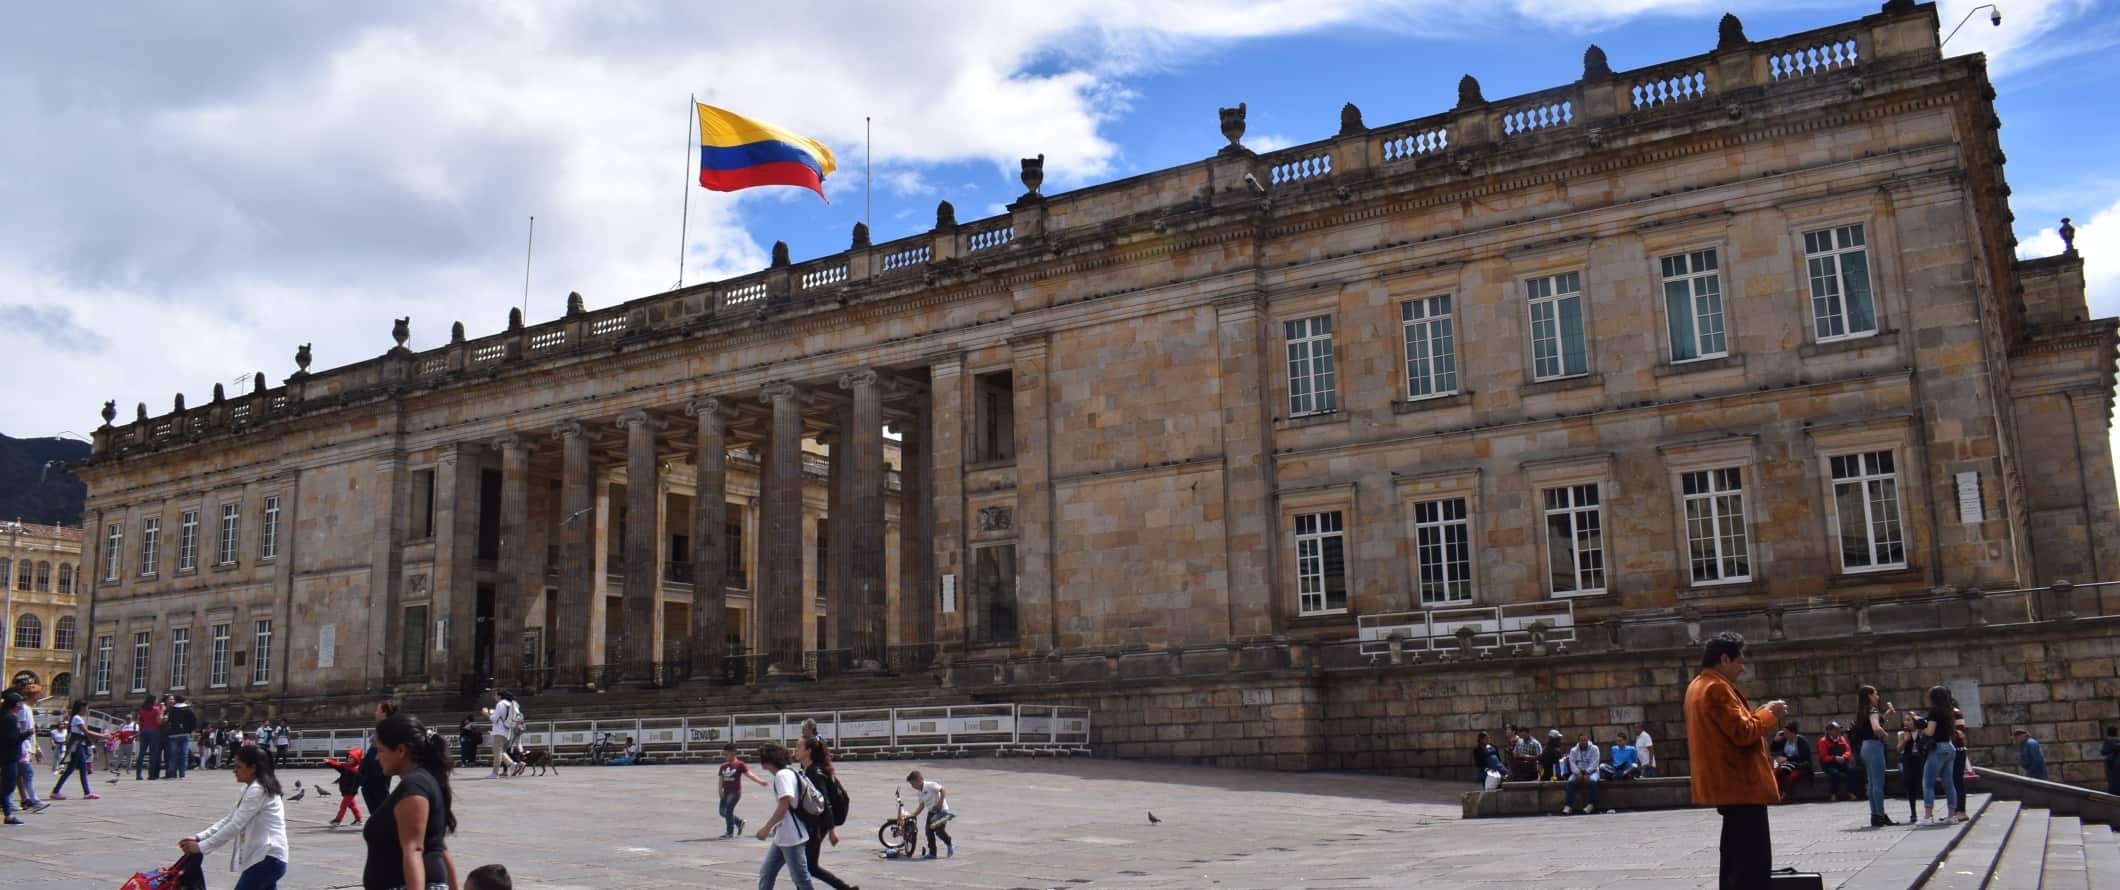 People walking around in front of a large neoclassical building with many pillars and the Colombian flag flying from the roof in Bogota, Colombia 